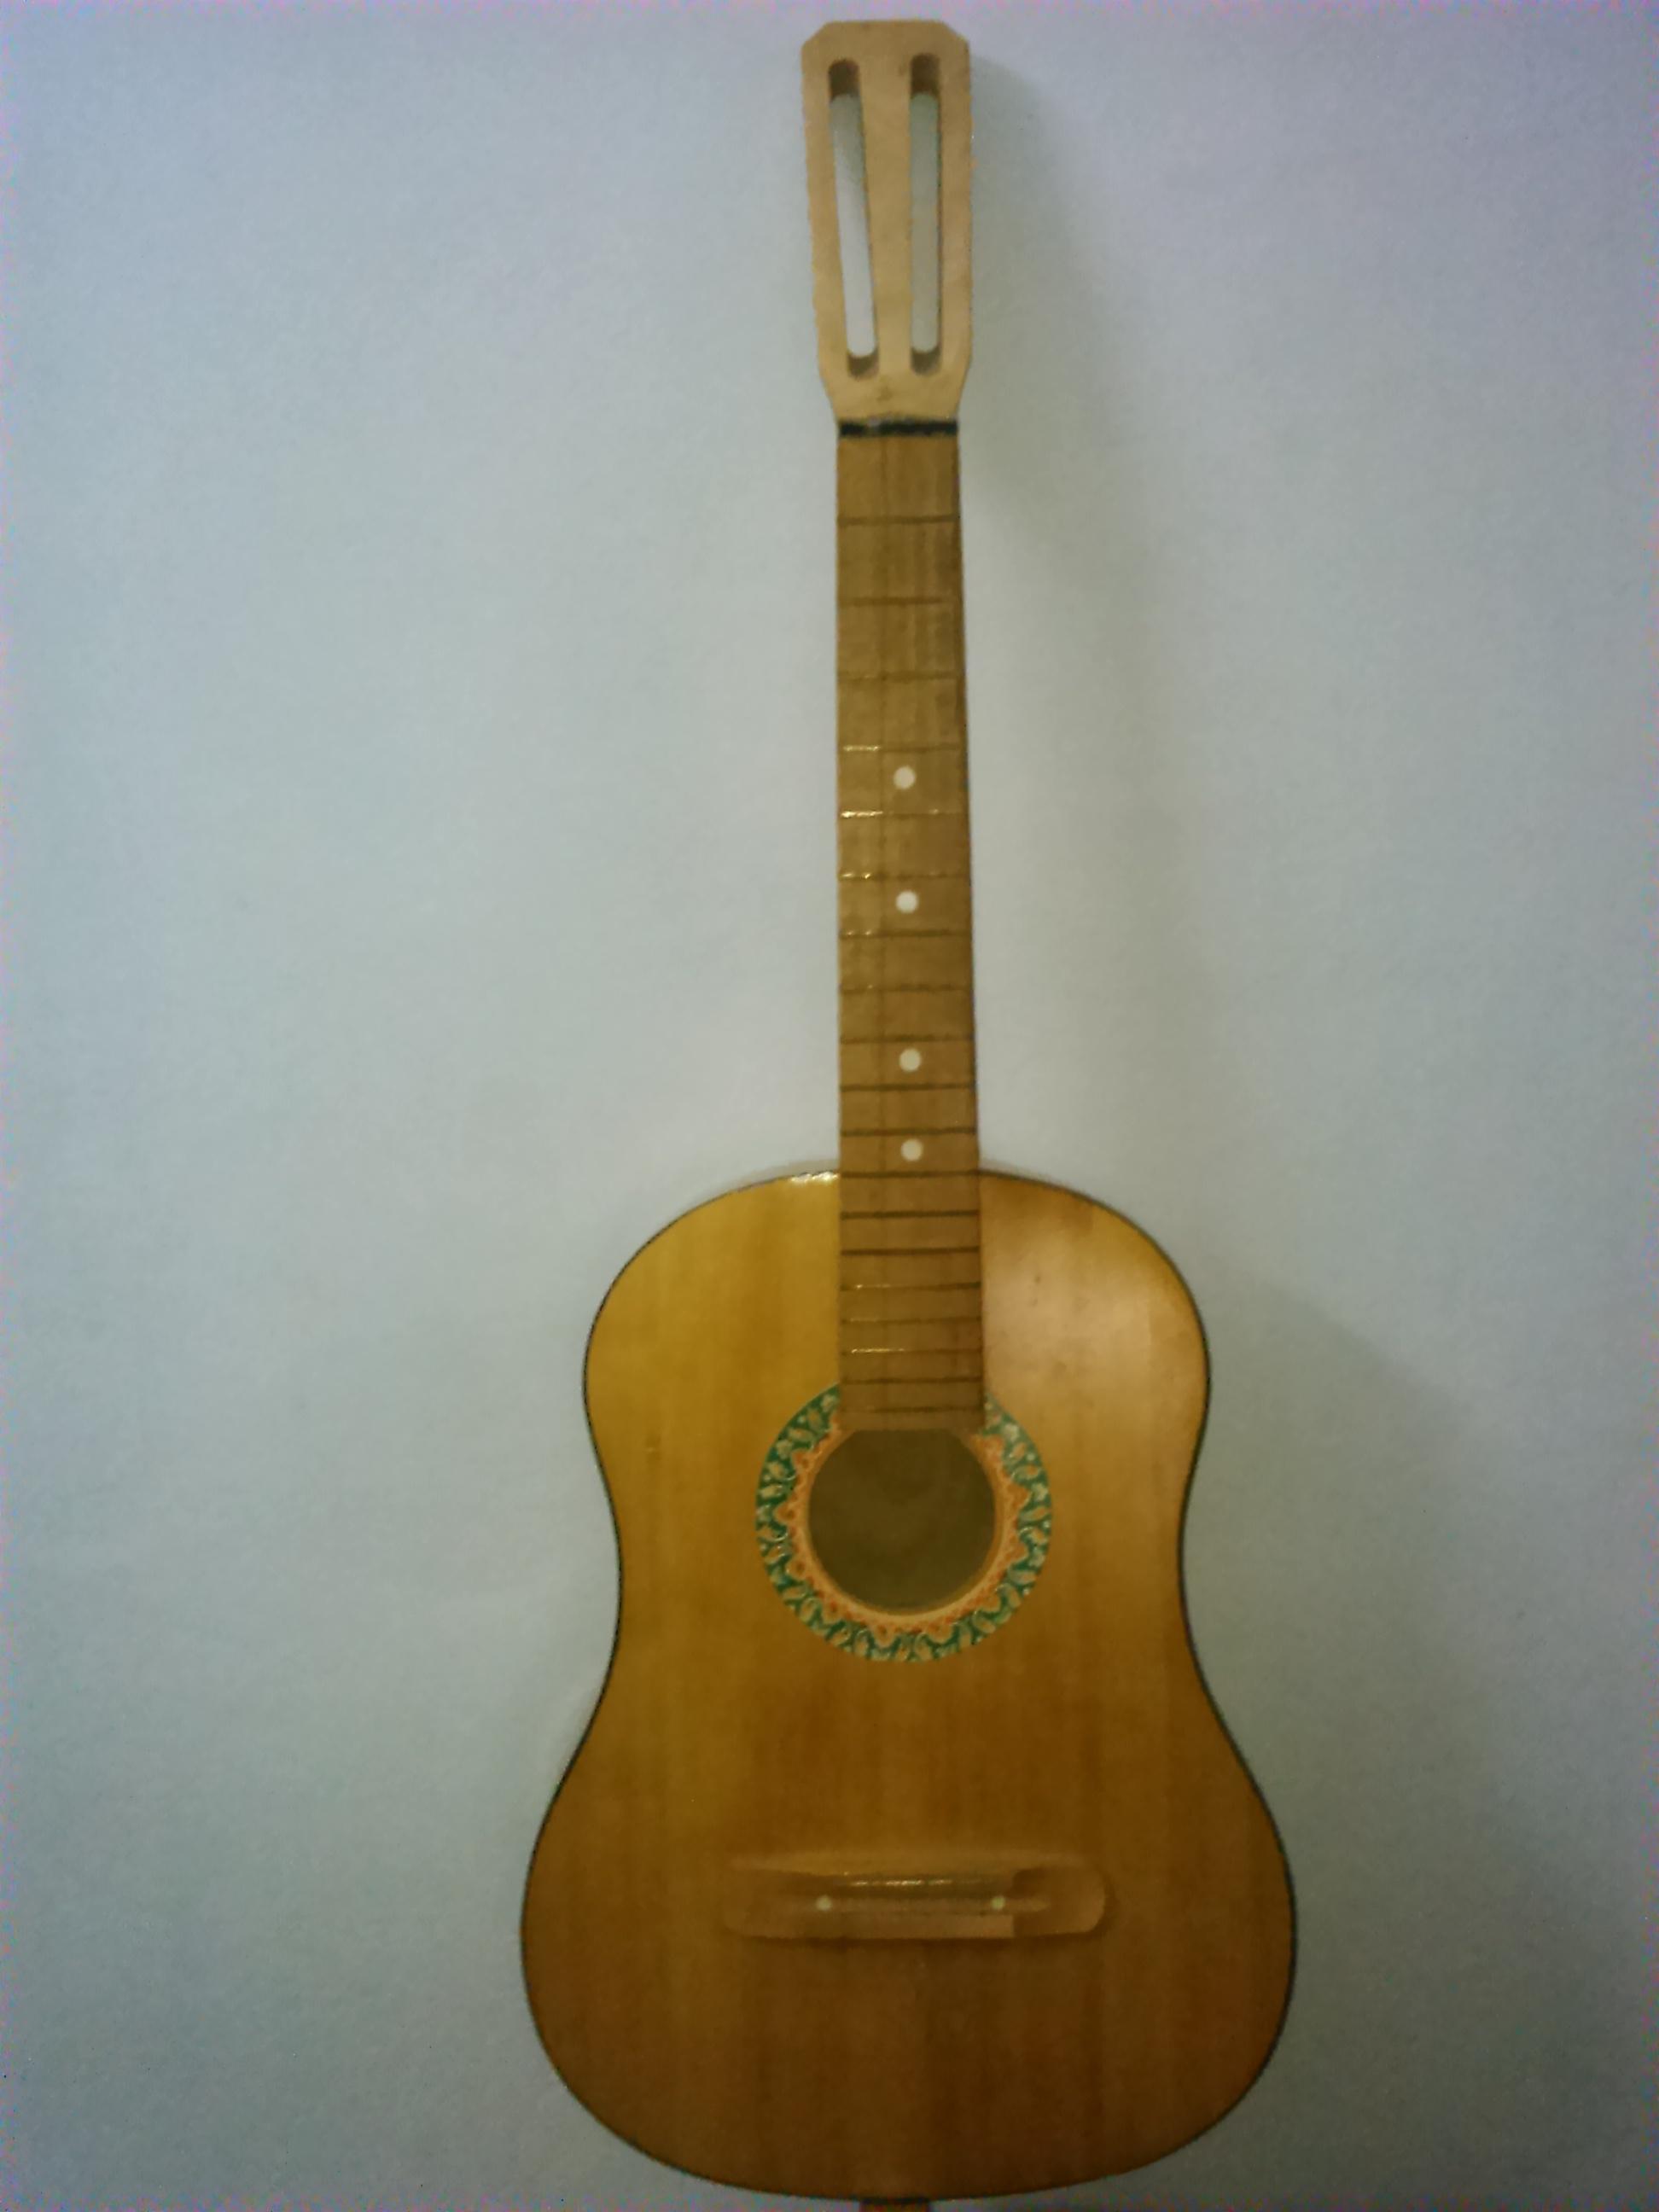 Is this old Soviet era guitar worth keeping? - Music: Practice ...